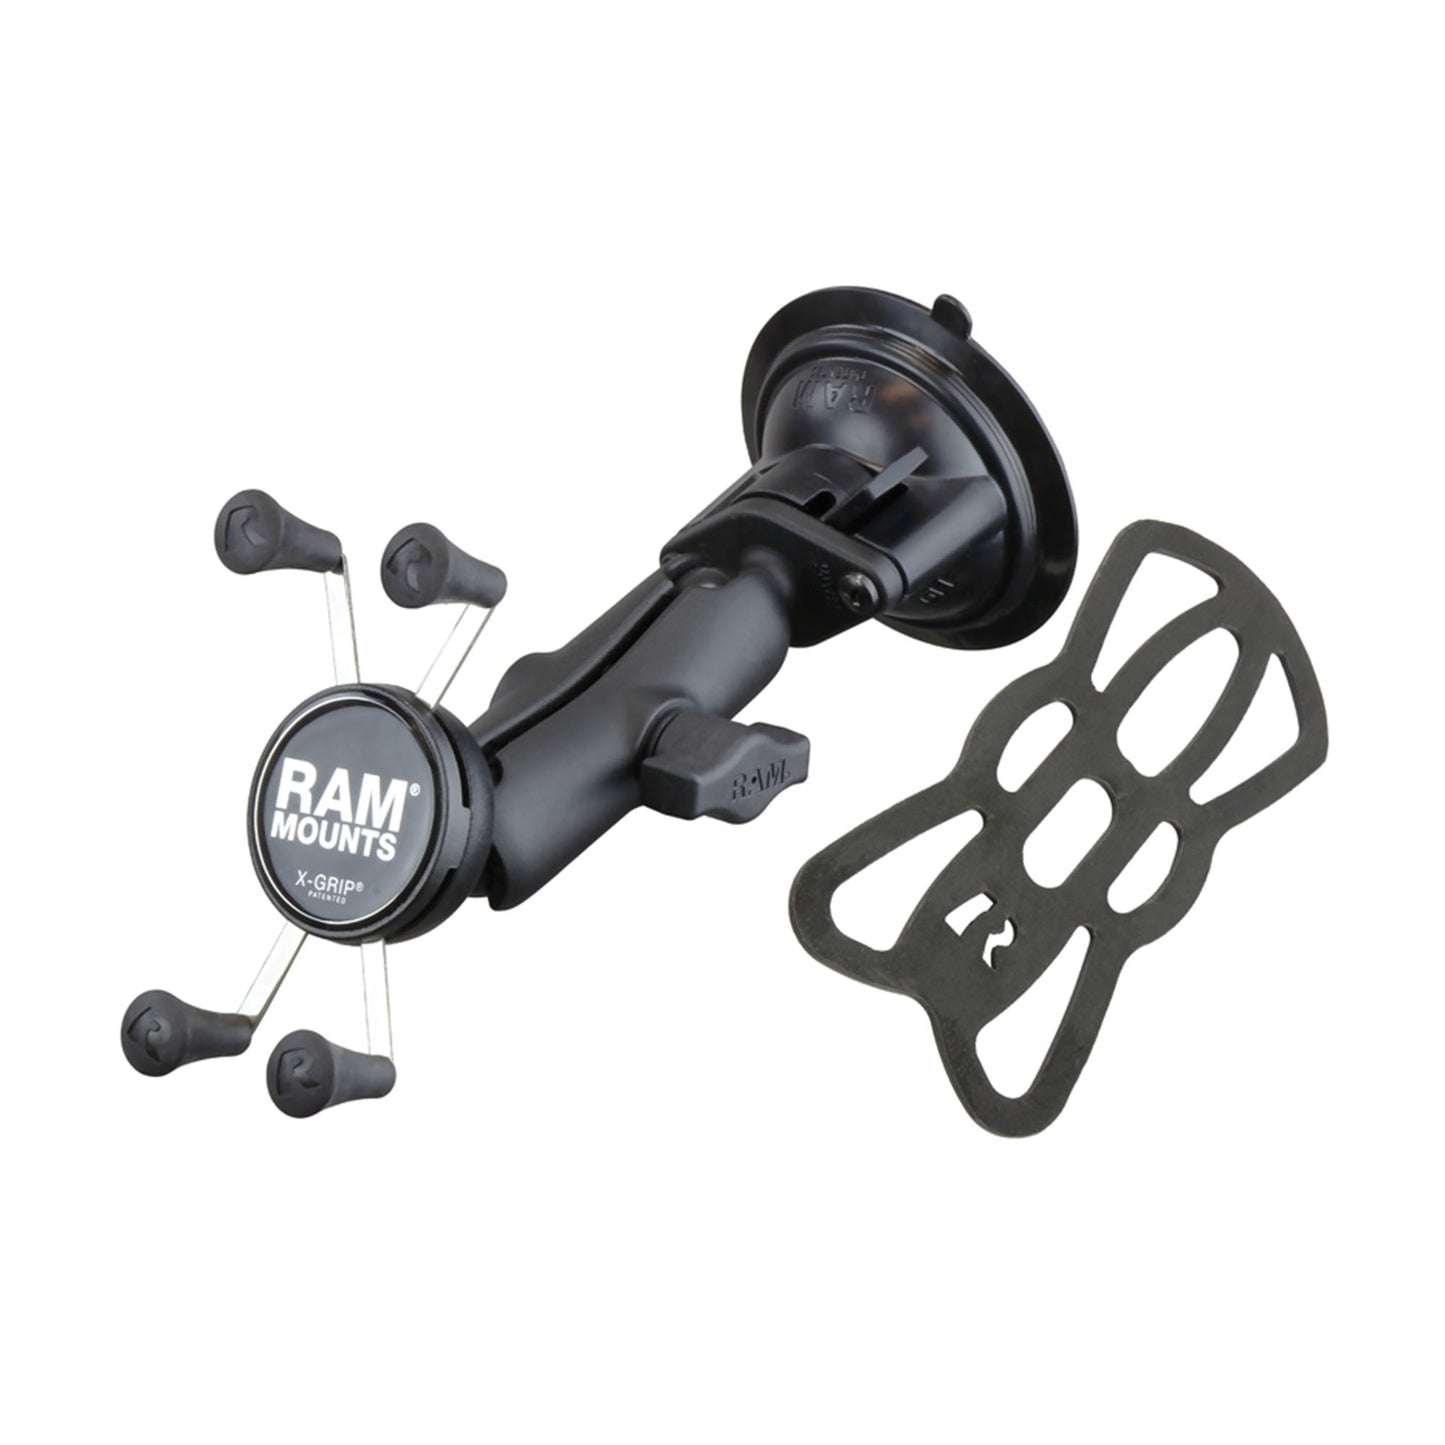 RAM Black X-Grip with Twist Lock Suction Cup Base Rugged Vehicle Mount - 15-05347